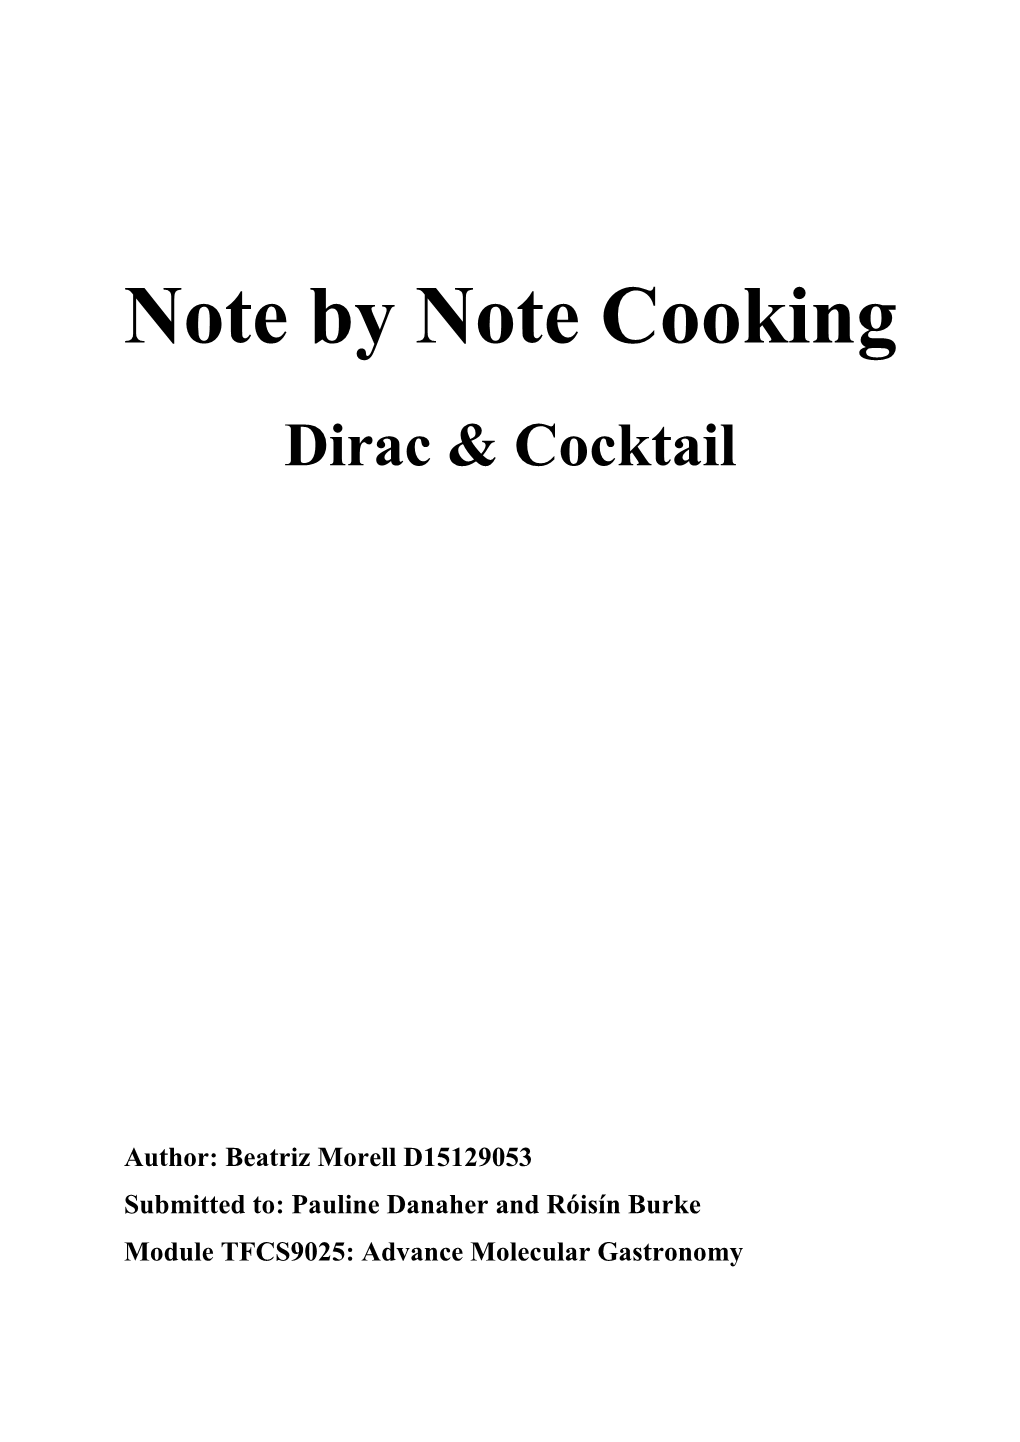 Note by Note Cooking Dirac & Cocktail